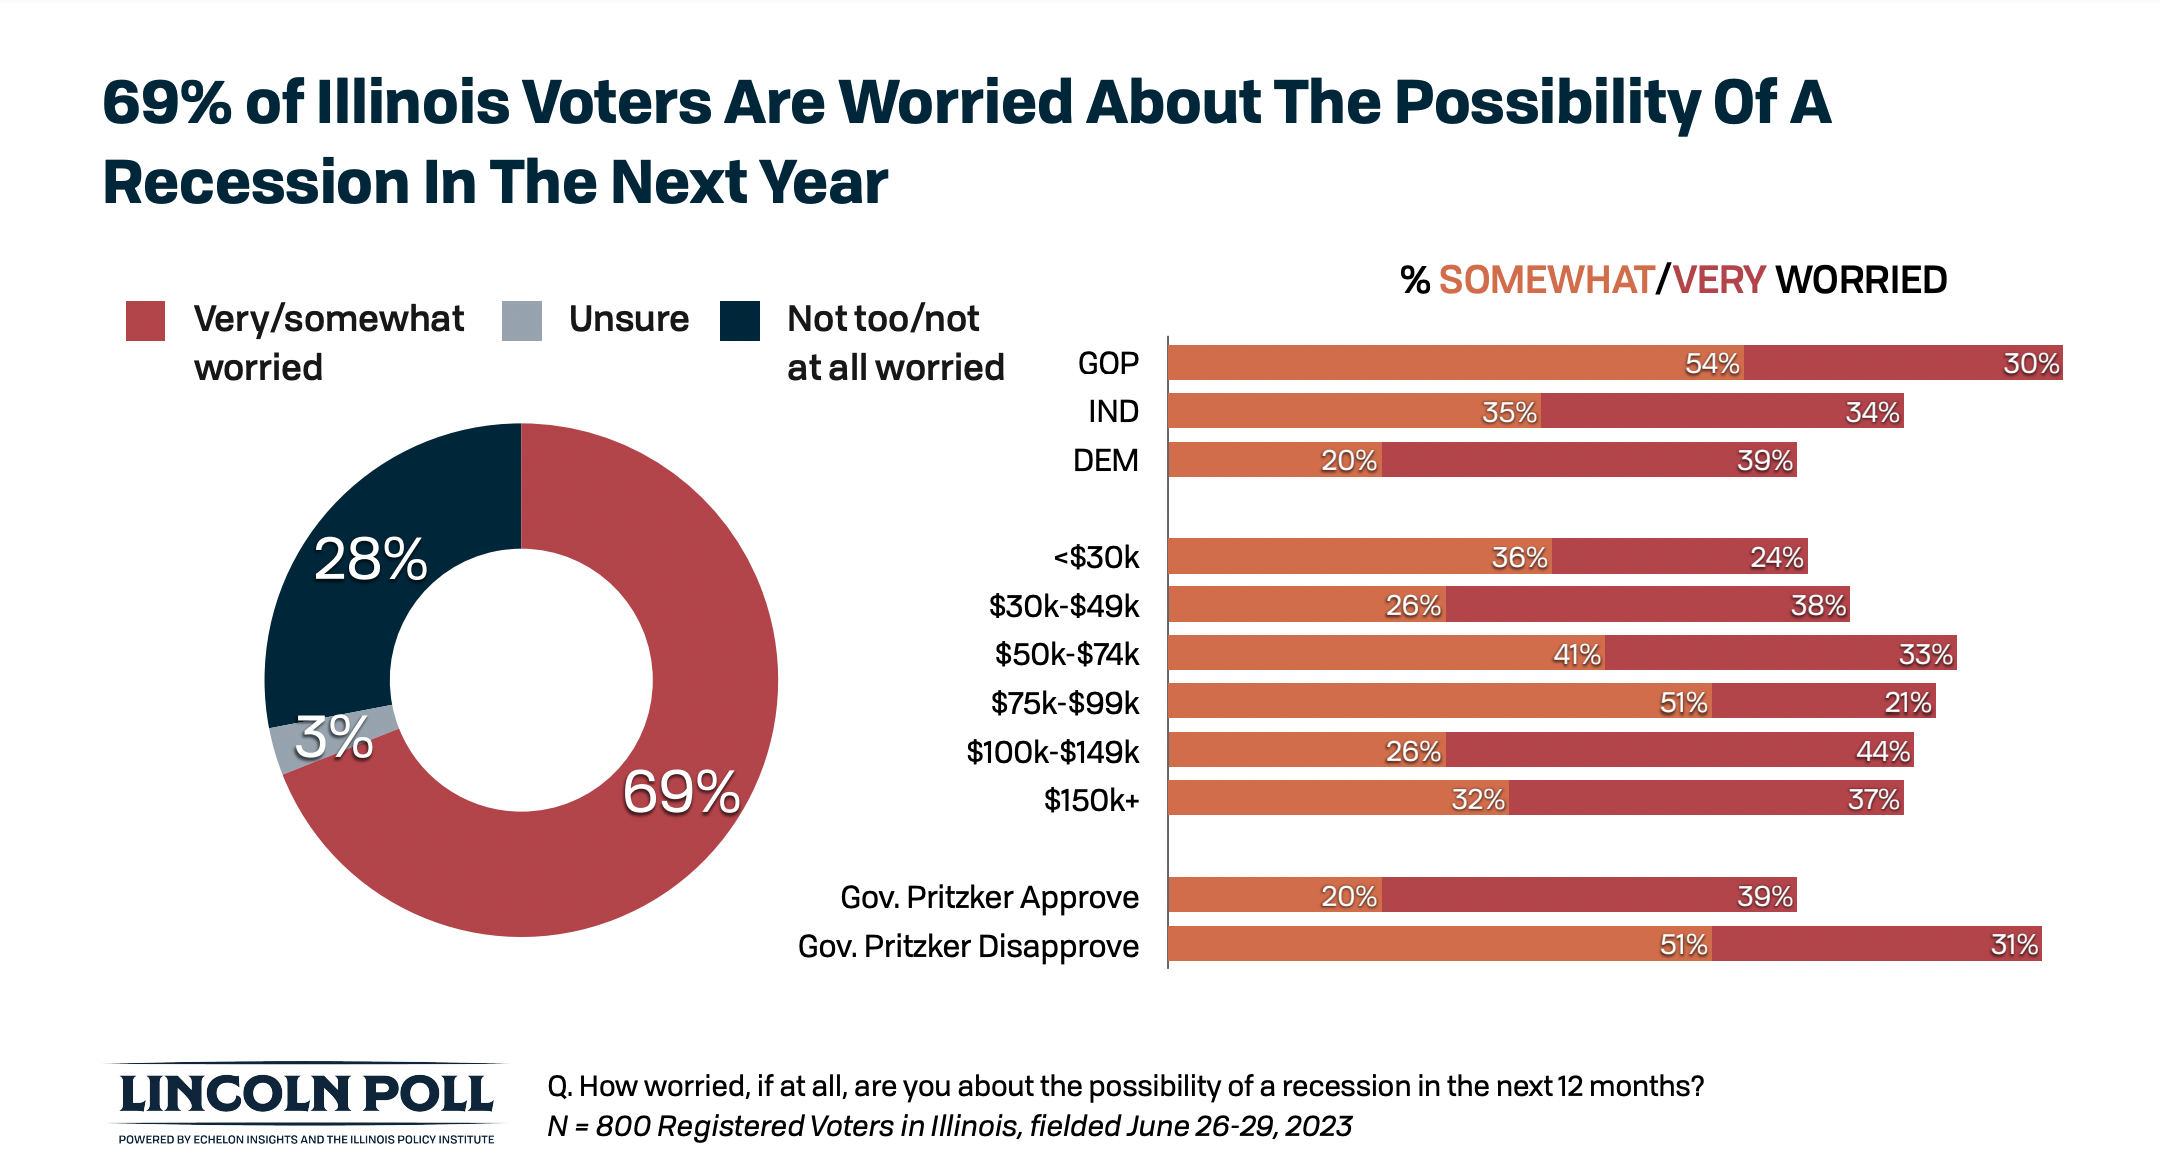 69% of Illinois Voters Are Worried About The Possibility Of A Recession In The Next Year